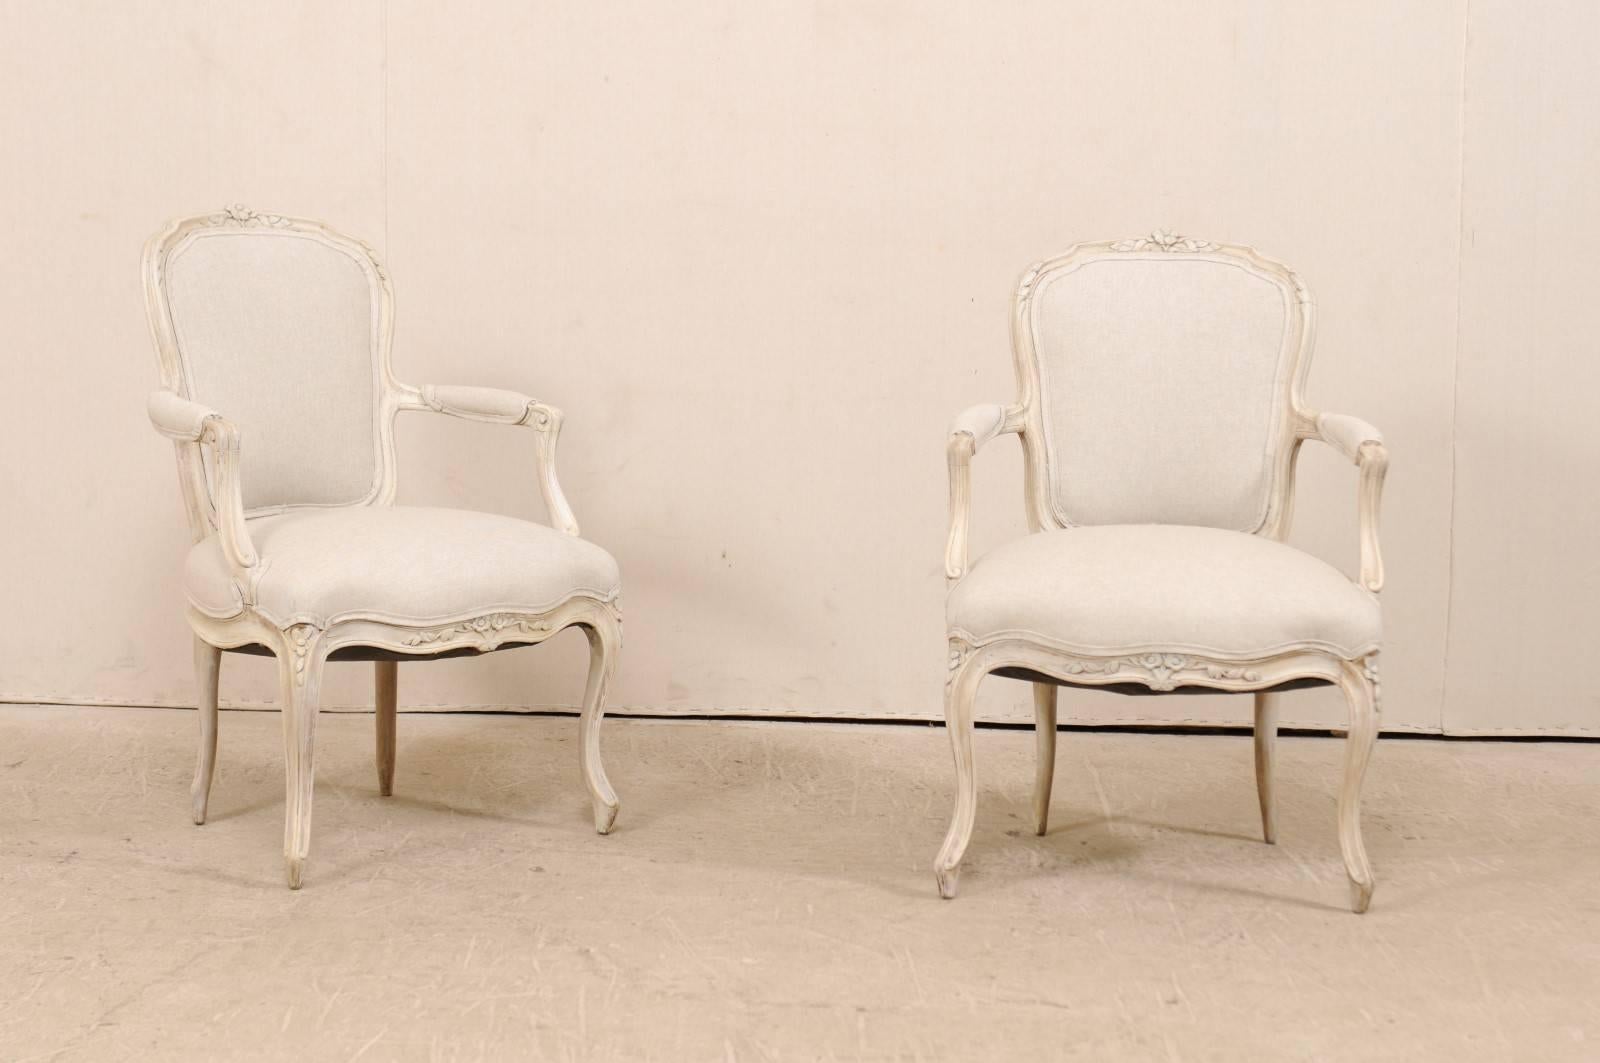 A pair of Swedish Louis XVI style armchairs from the mid-20th century. This pair of Swedish upholstered and carved wood arm chairs feature nicely carved floral motifs about the upper crest rail, center skirt and knees. The arms are padded at their